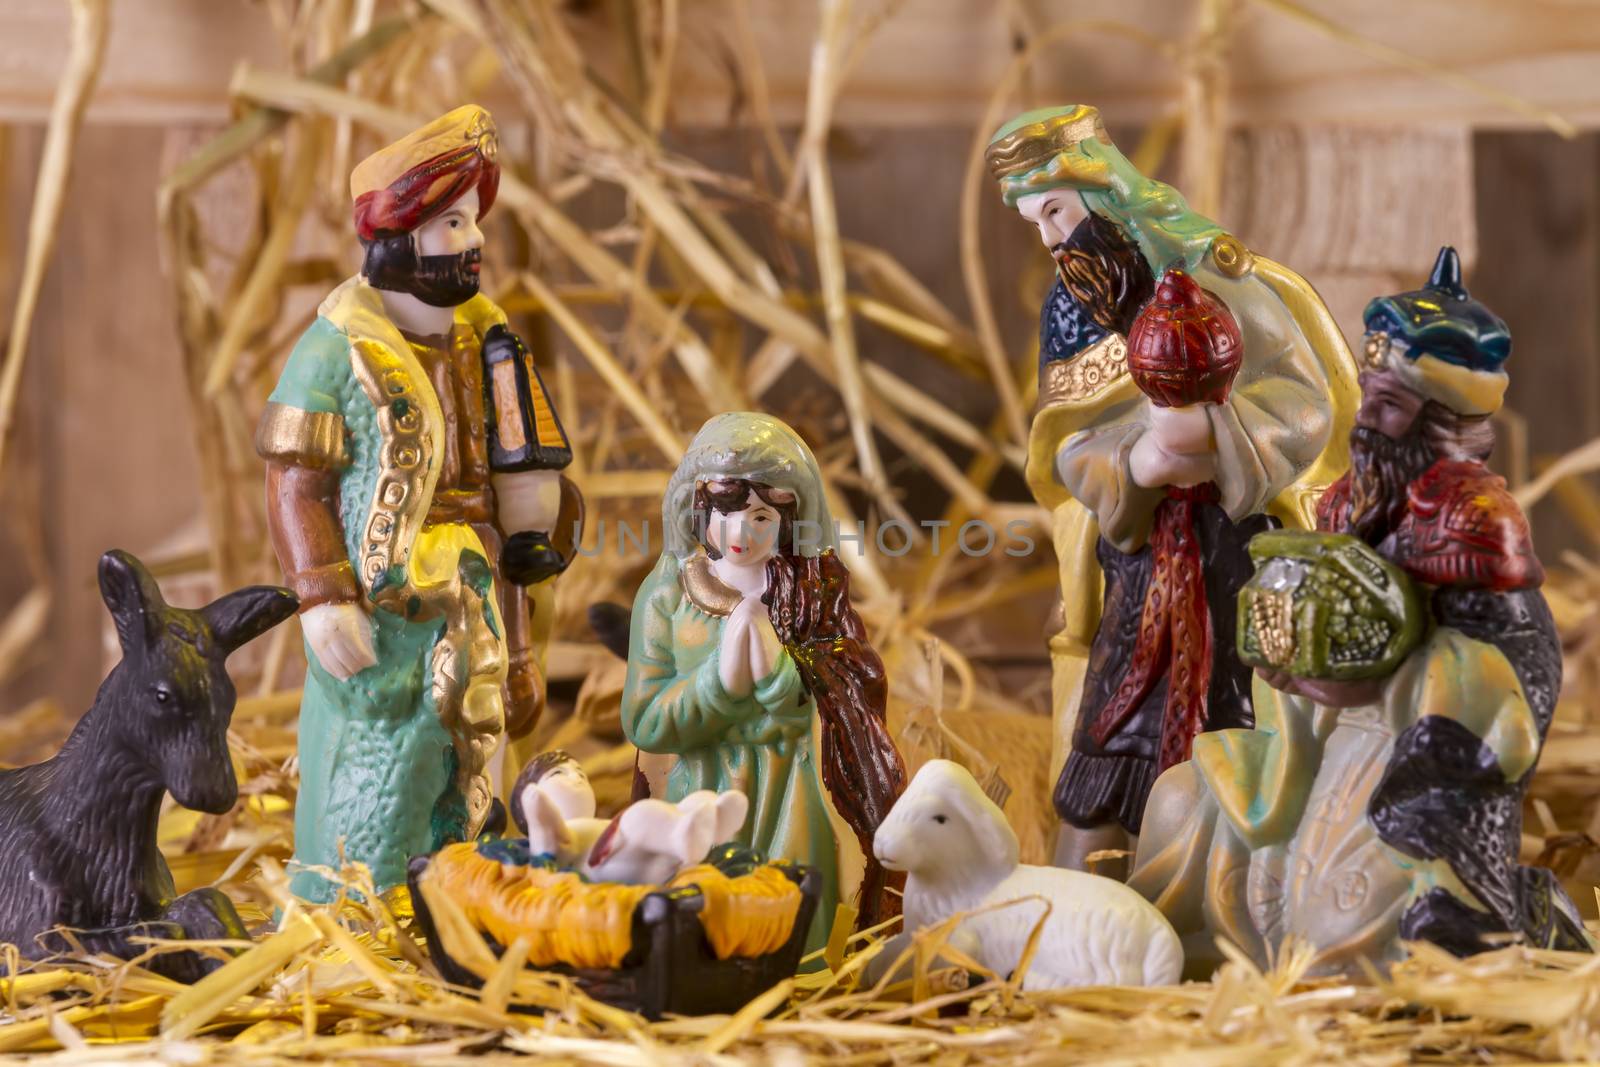 Christmas Manger scene with figurines  by manaemedia